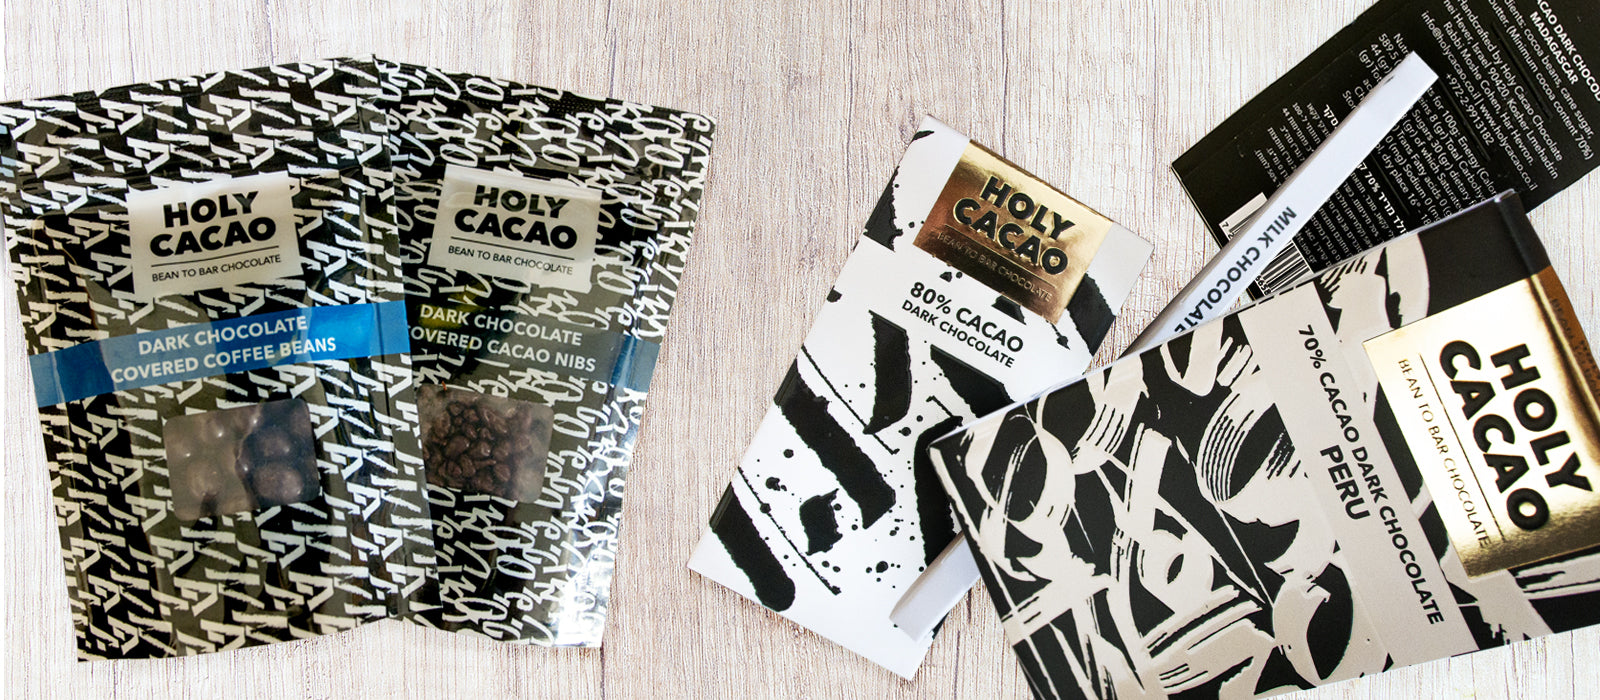 We just added Holy Cacao chocolate to the store again!